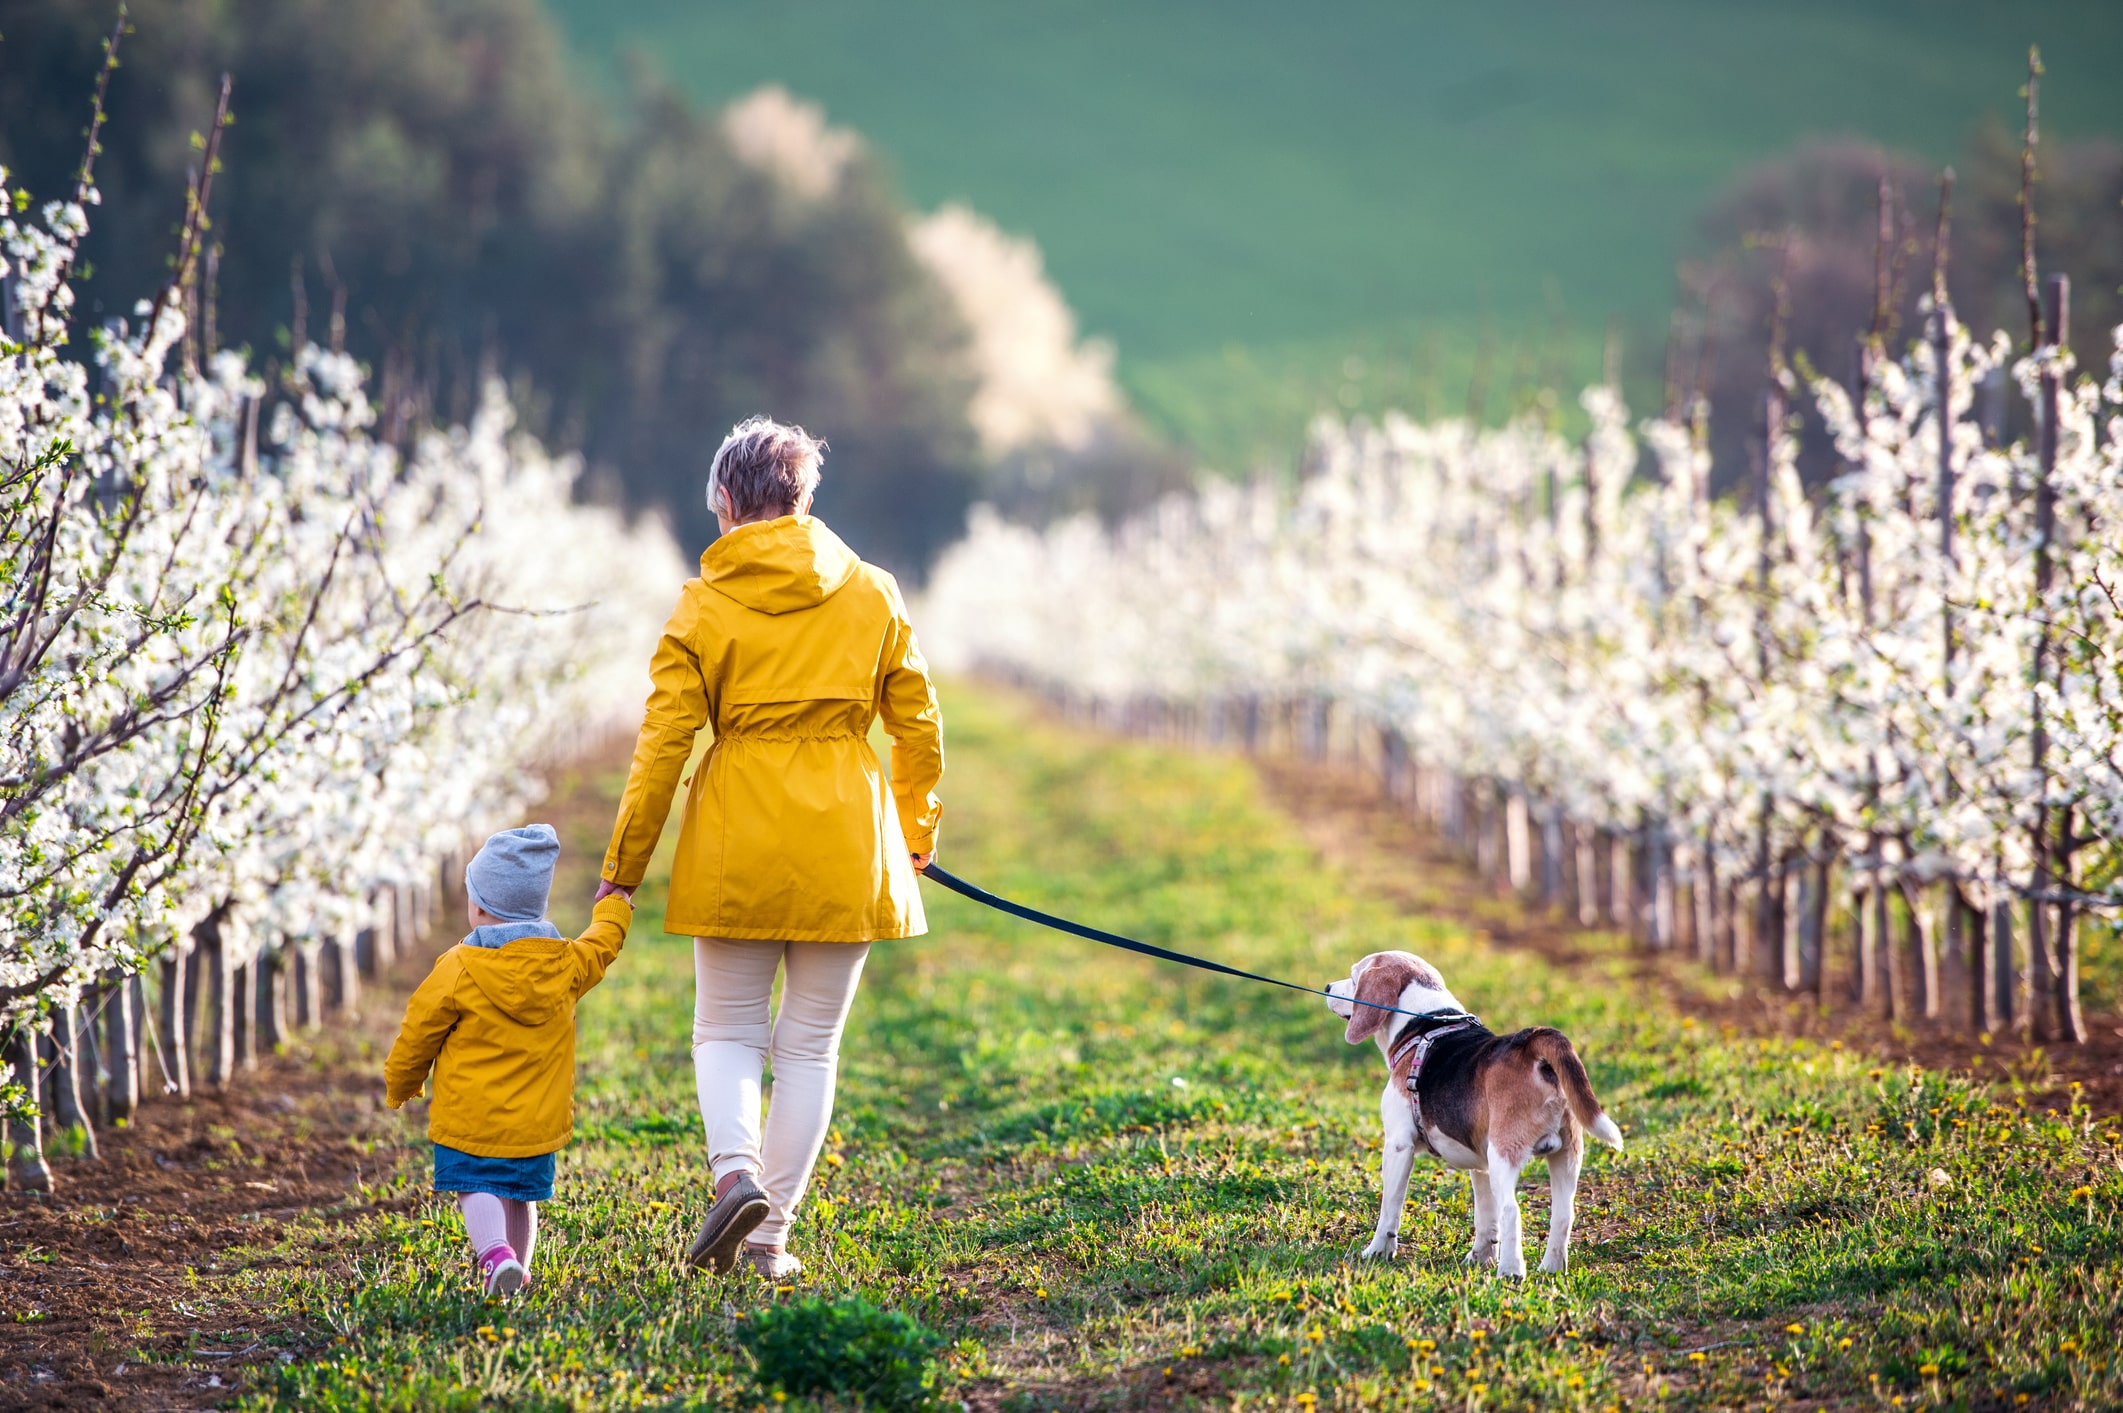 Elderly woman walking away from the viewer in a row of trees, holding hands with her grandchild and walking her dog, embodying the ease and joy of a well-planned retirement.